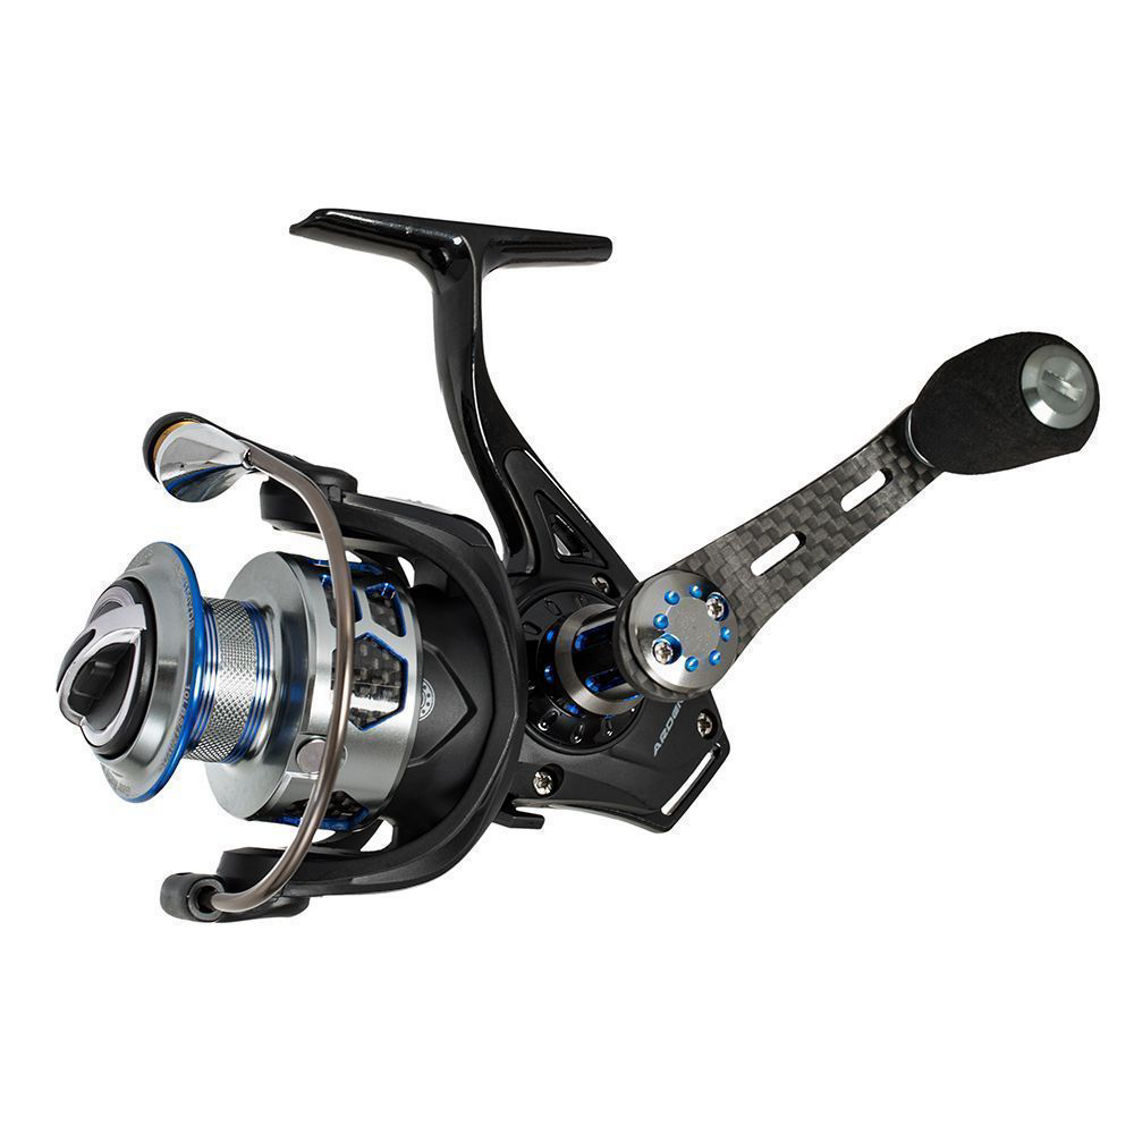 Ardent Bolt Spinning Reel - 2000 Size Left Or Right Hand